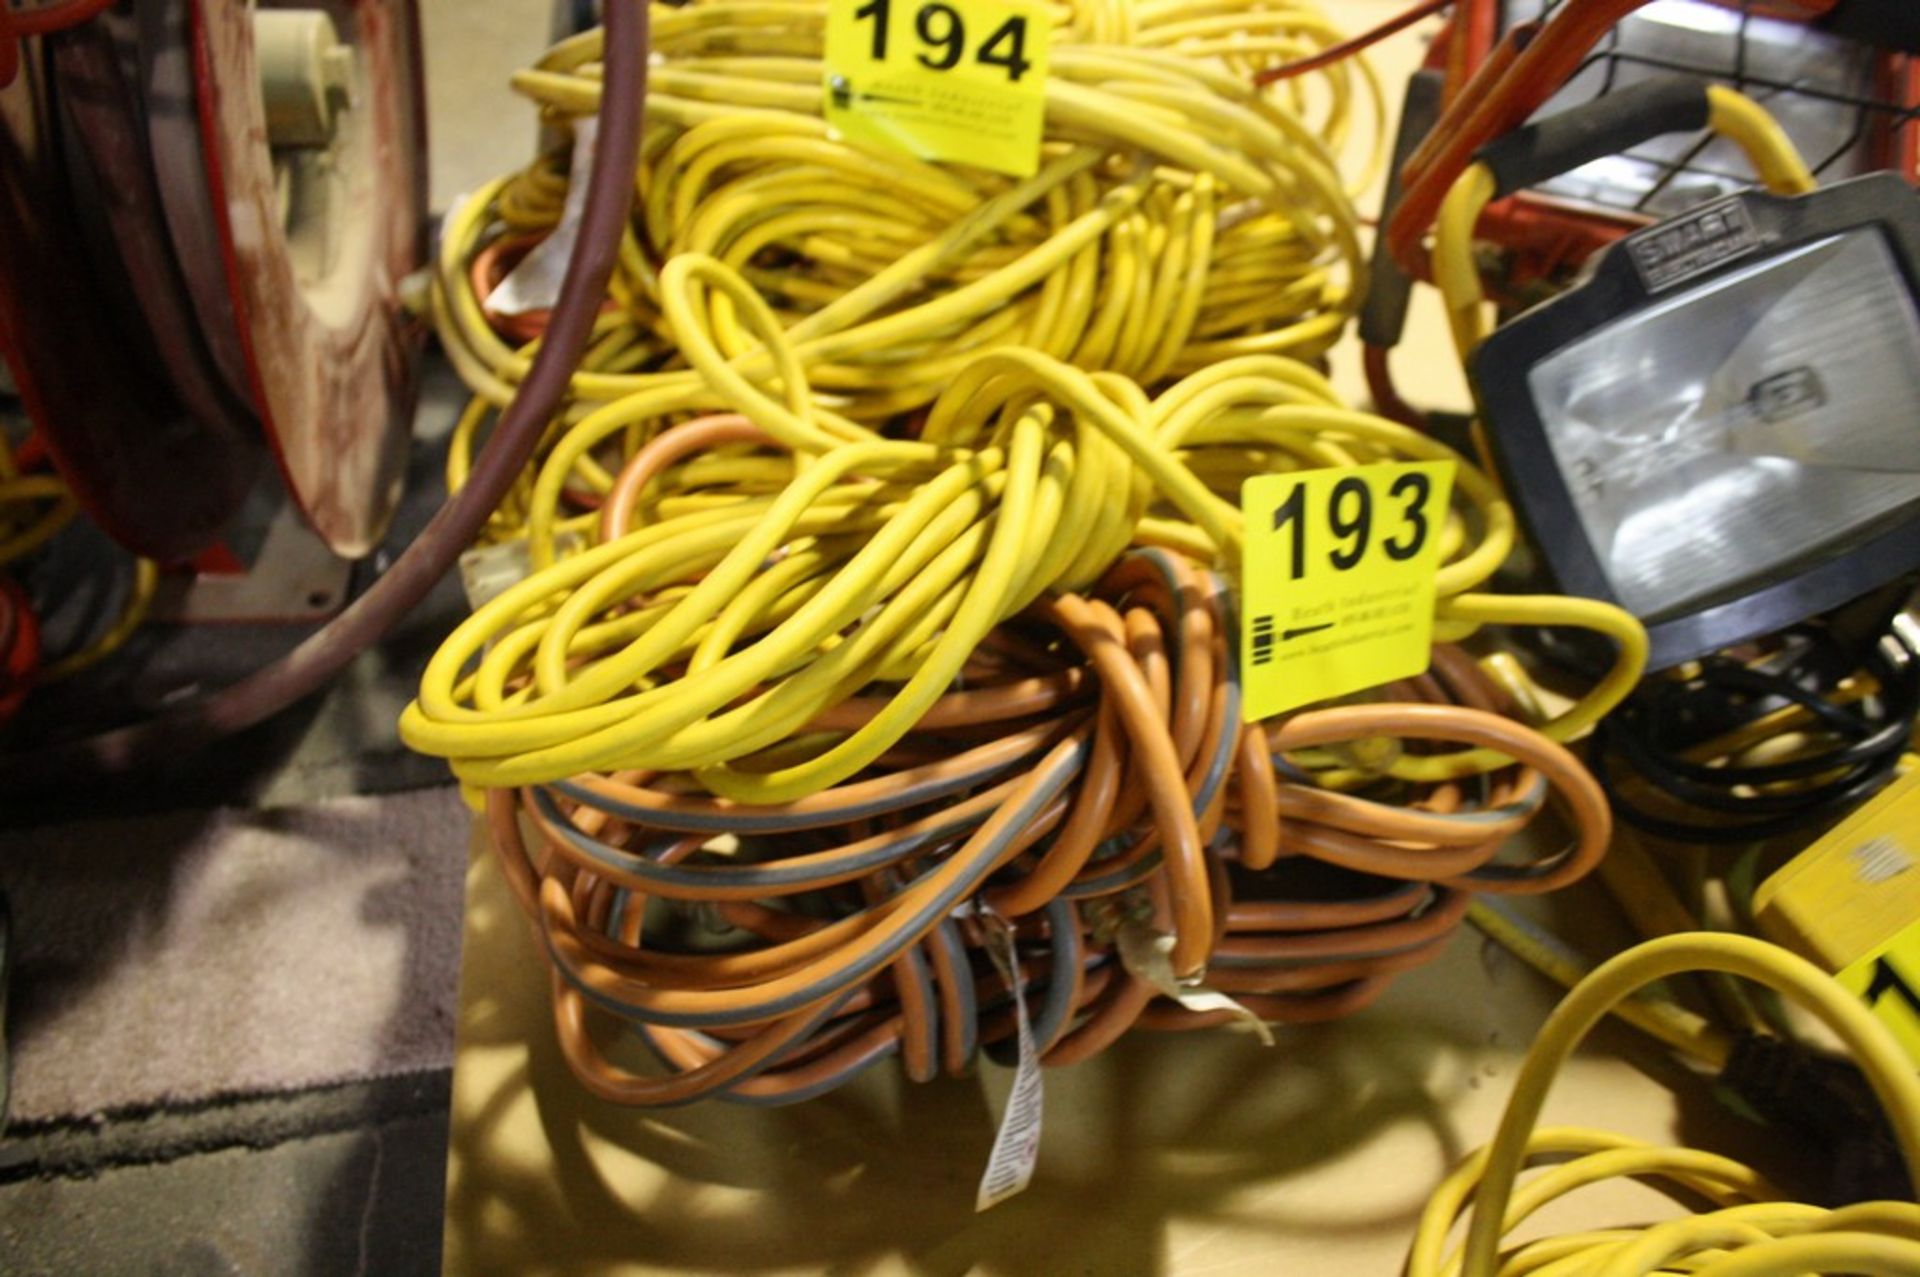 ASSORTED EXTENSION CORDS